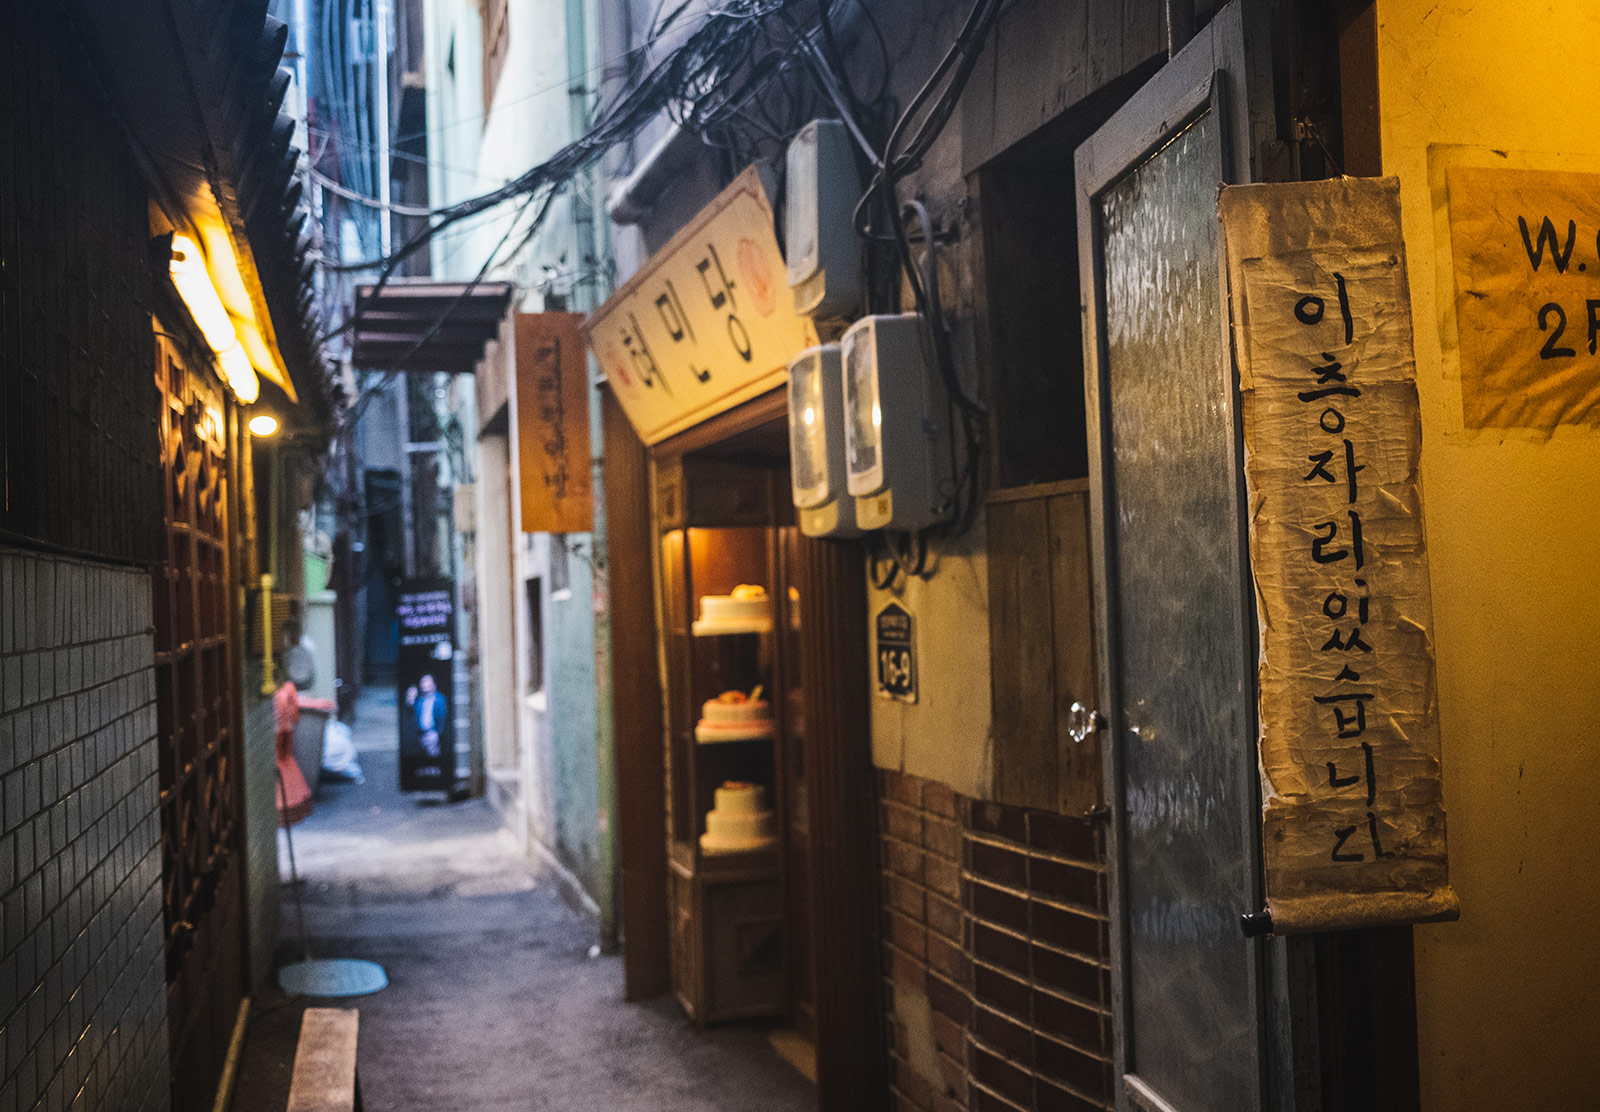 Narrow alley with Korean sign